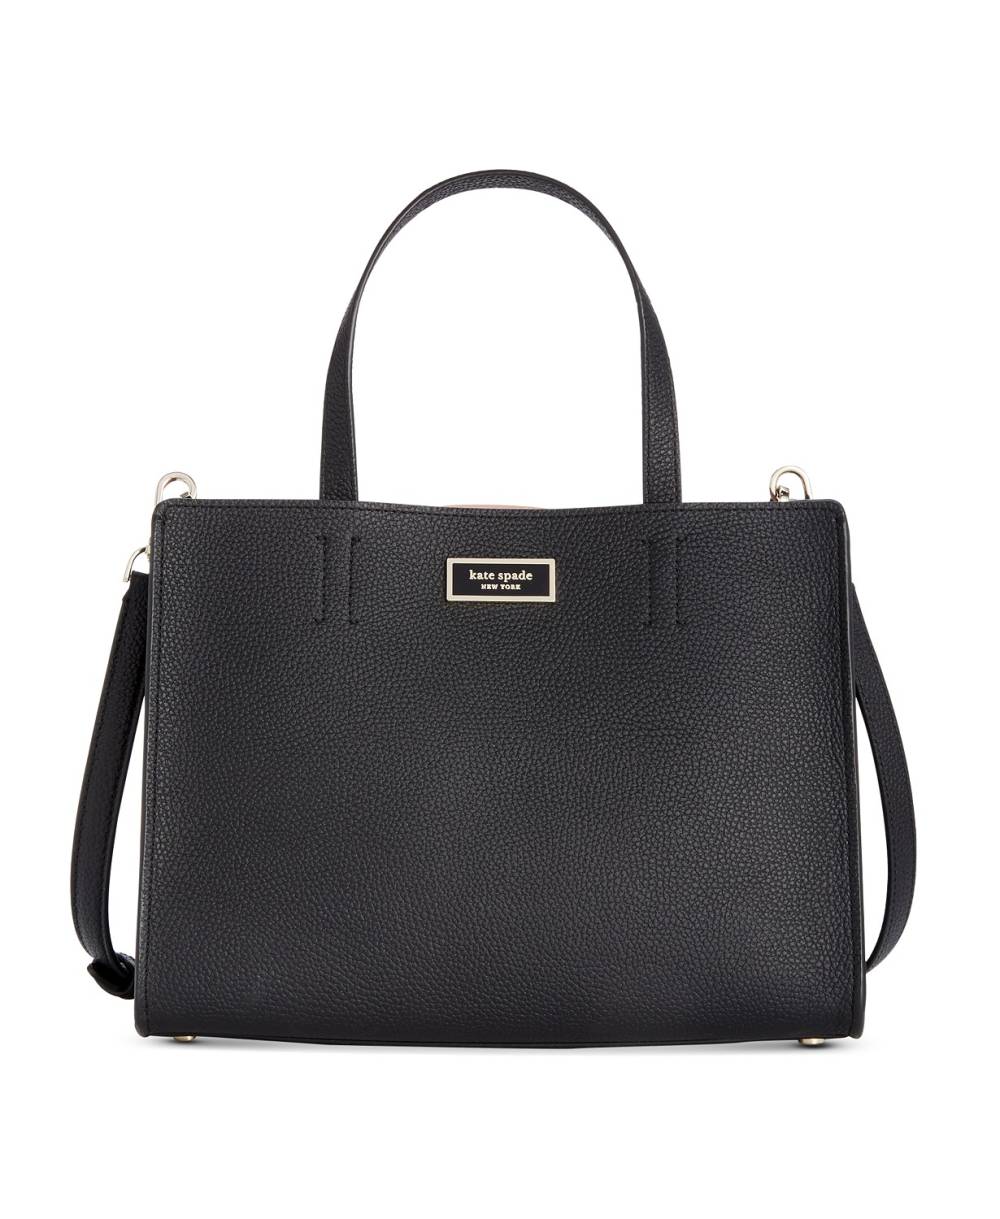 The Most Iconic Kate Spade Bag Is on Sale in So Many Colors